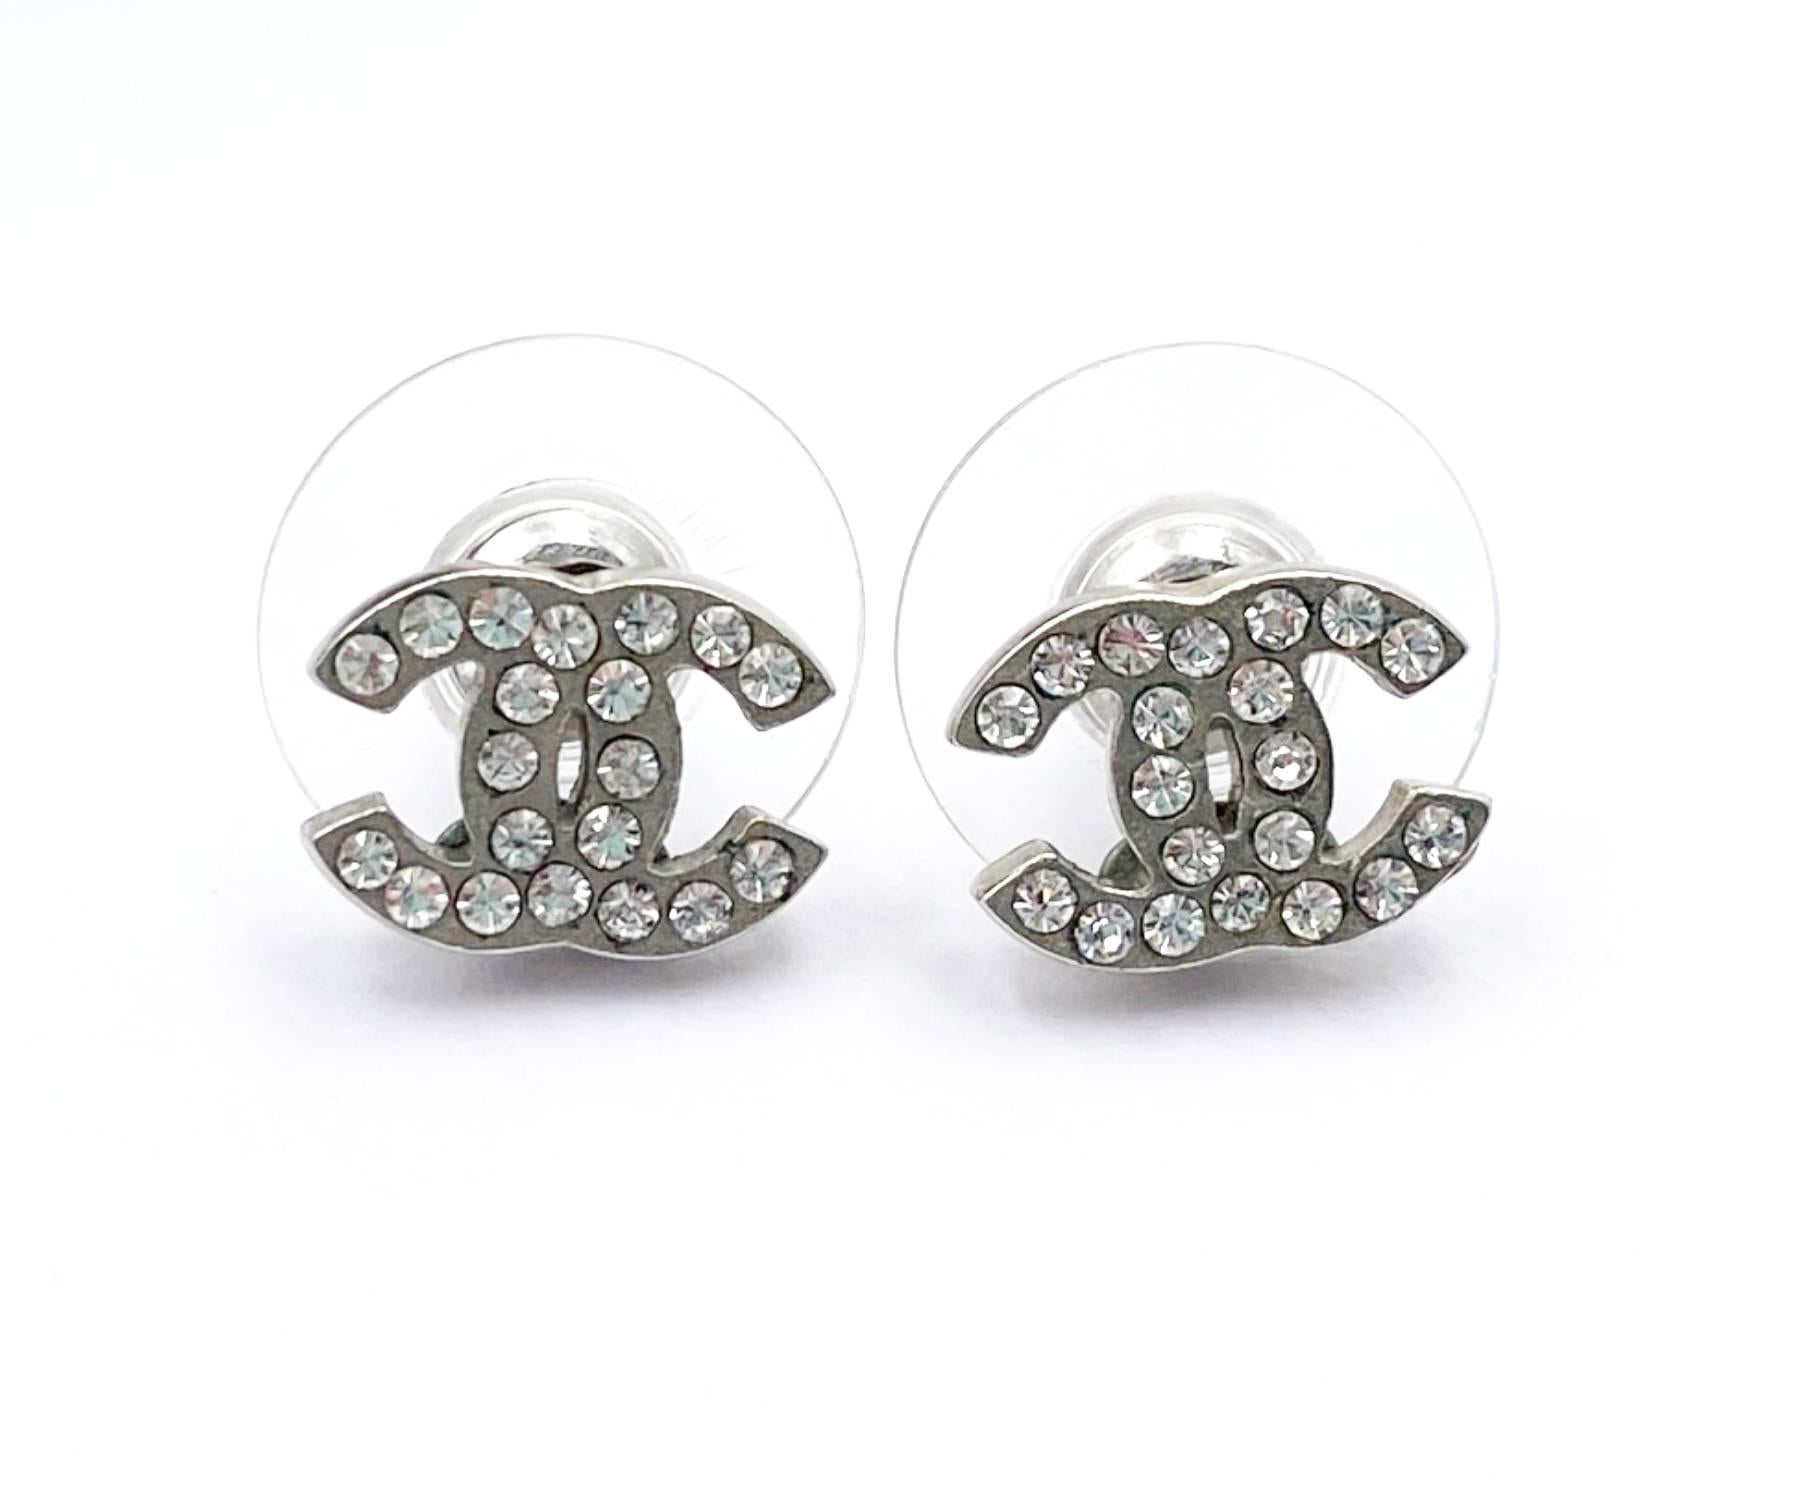 Chanel Classic Silver CC Crystal Small Piercing Earrings

*Marked 09 ( Missing 1 hallmark)
*Made in France

-Approximately 0.3